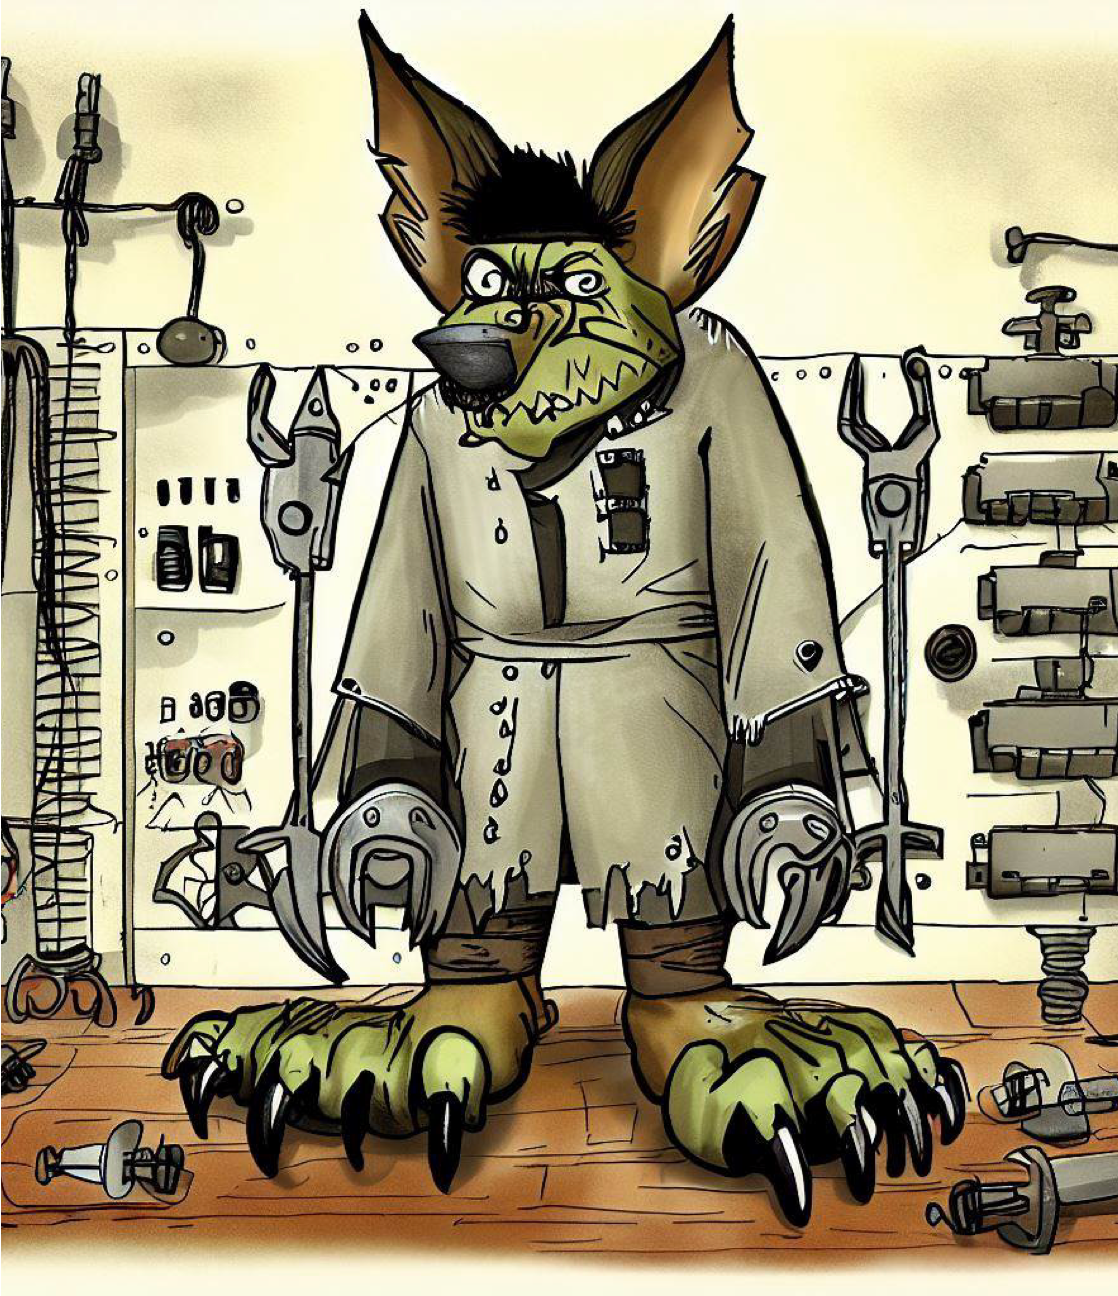 A coyote with a similar appearance to Frankenstein's monster